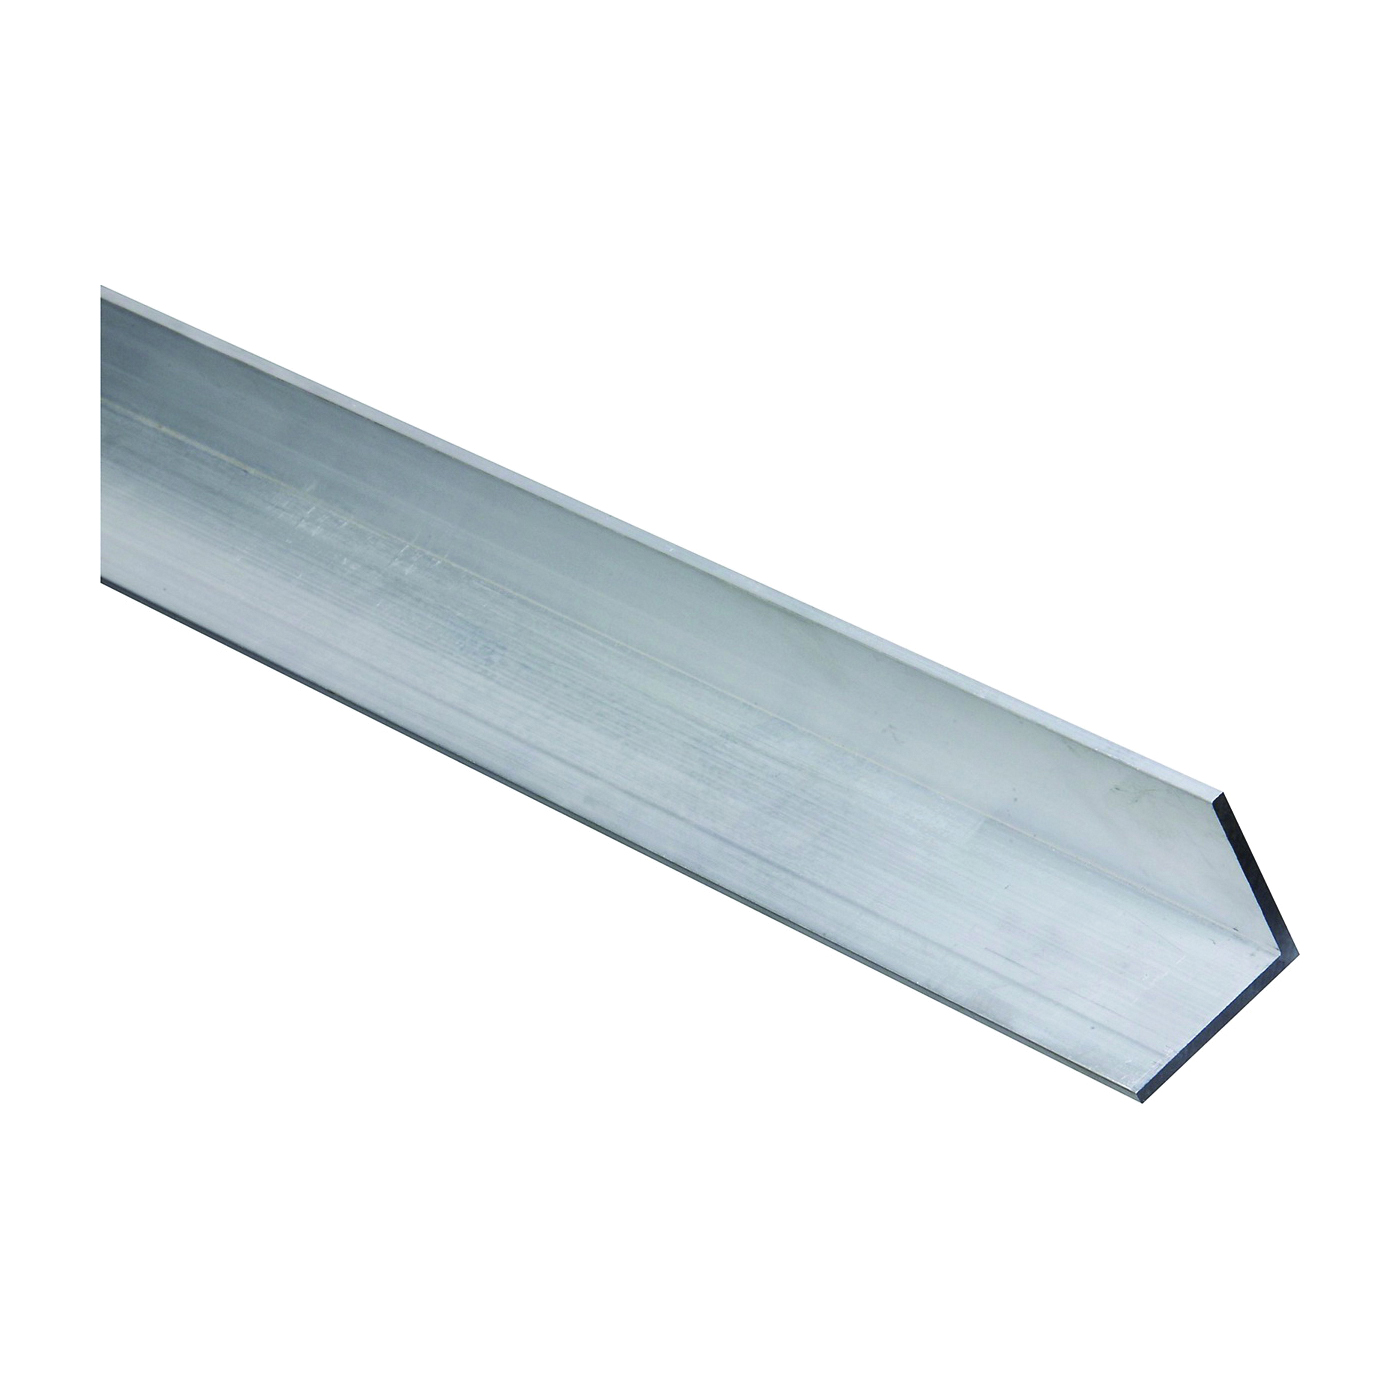 4204BC Series N247-452 Angle Stock, 1-1/2 in L Leg, 72 in L, 1/8 in Thick, Aluminum, Mill